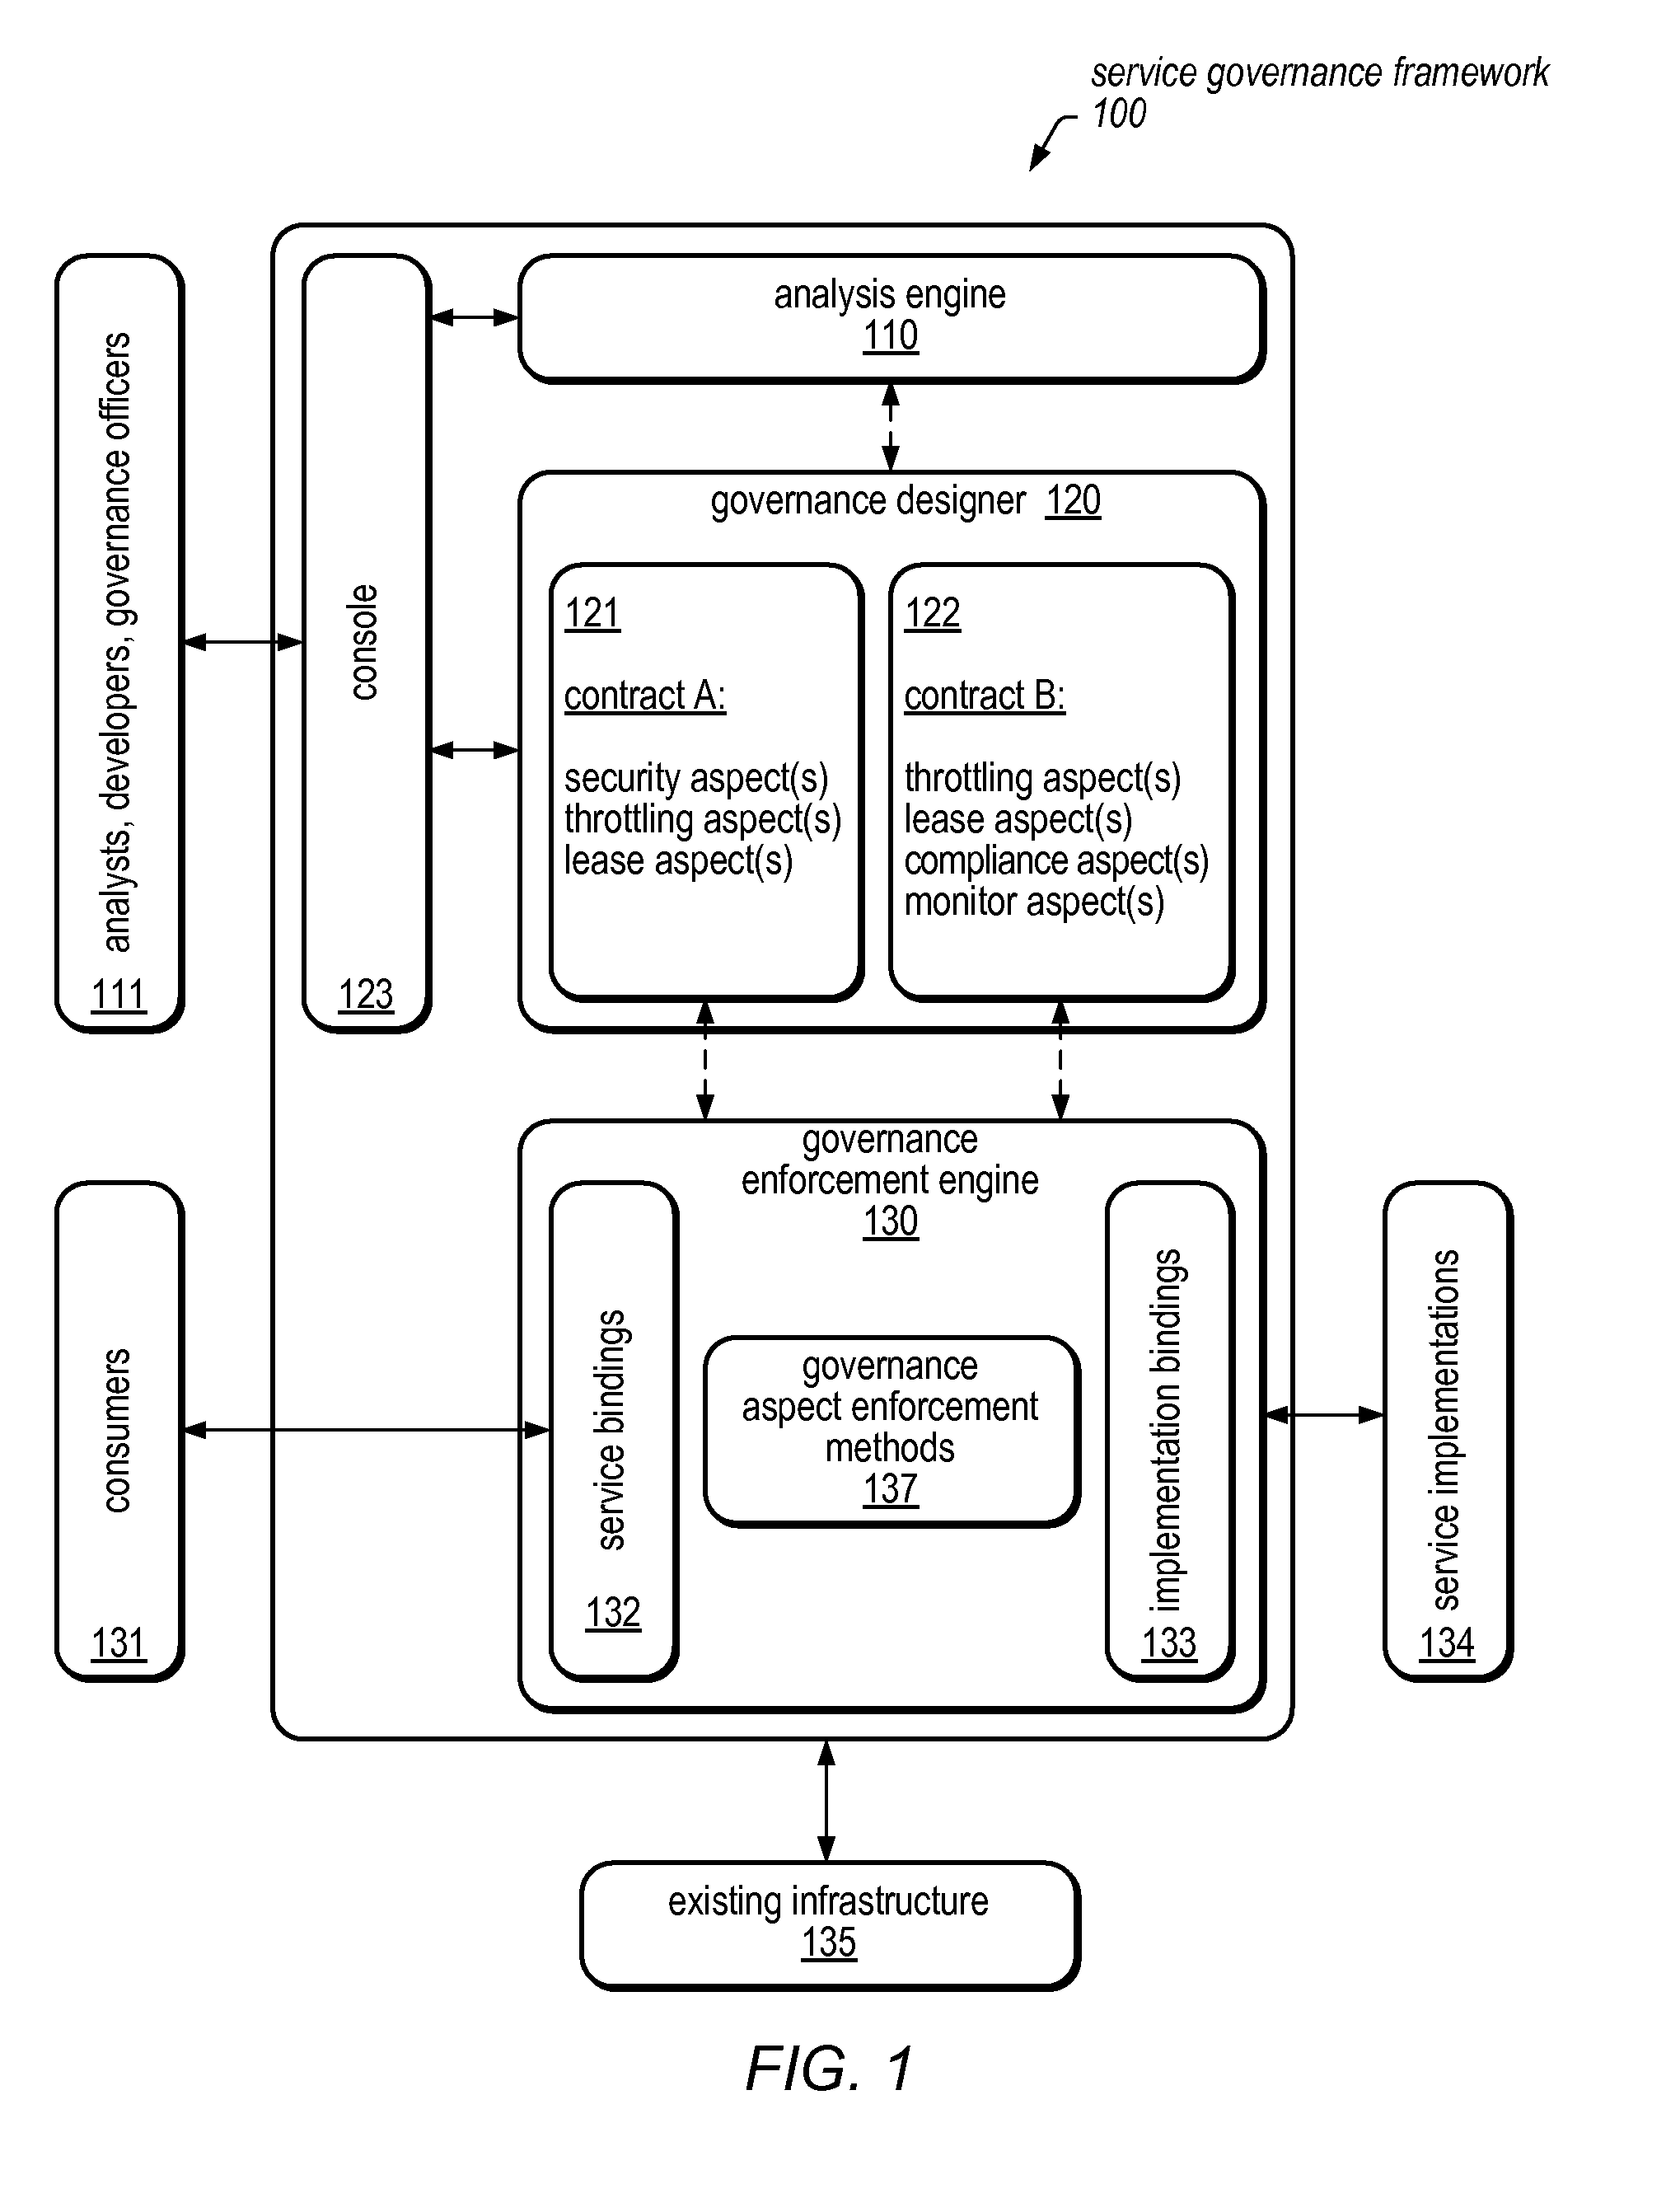 System and Method for Service Virtualization in a Service Governance Framework